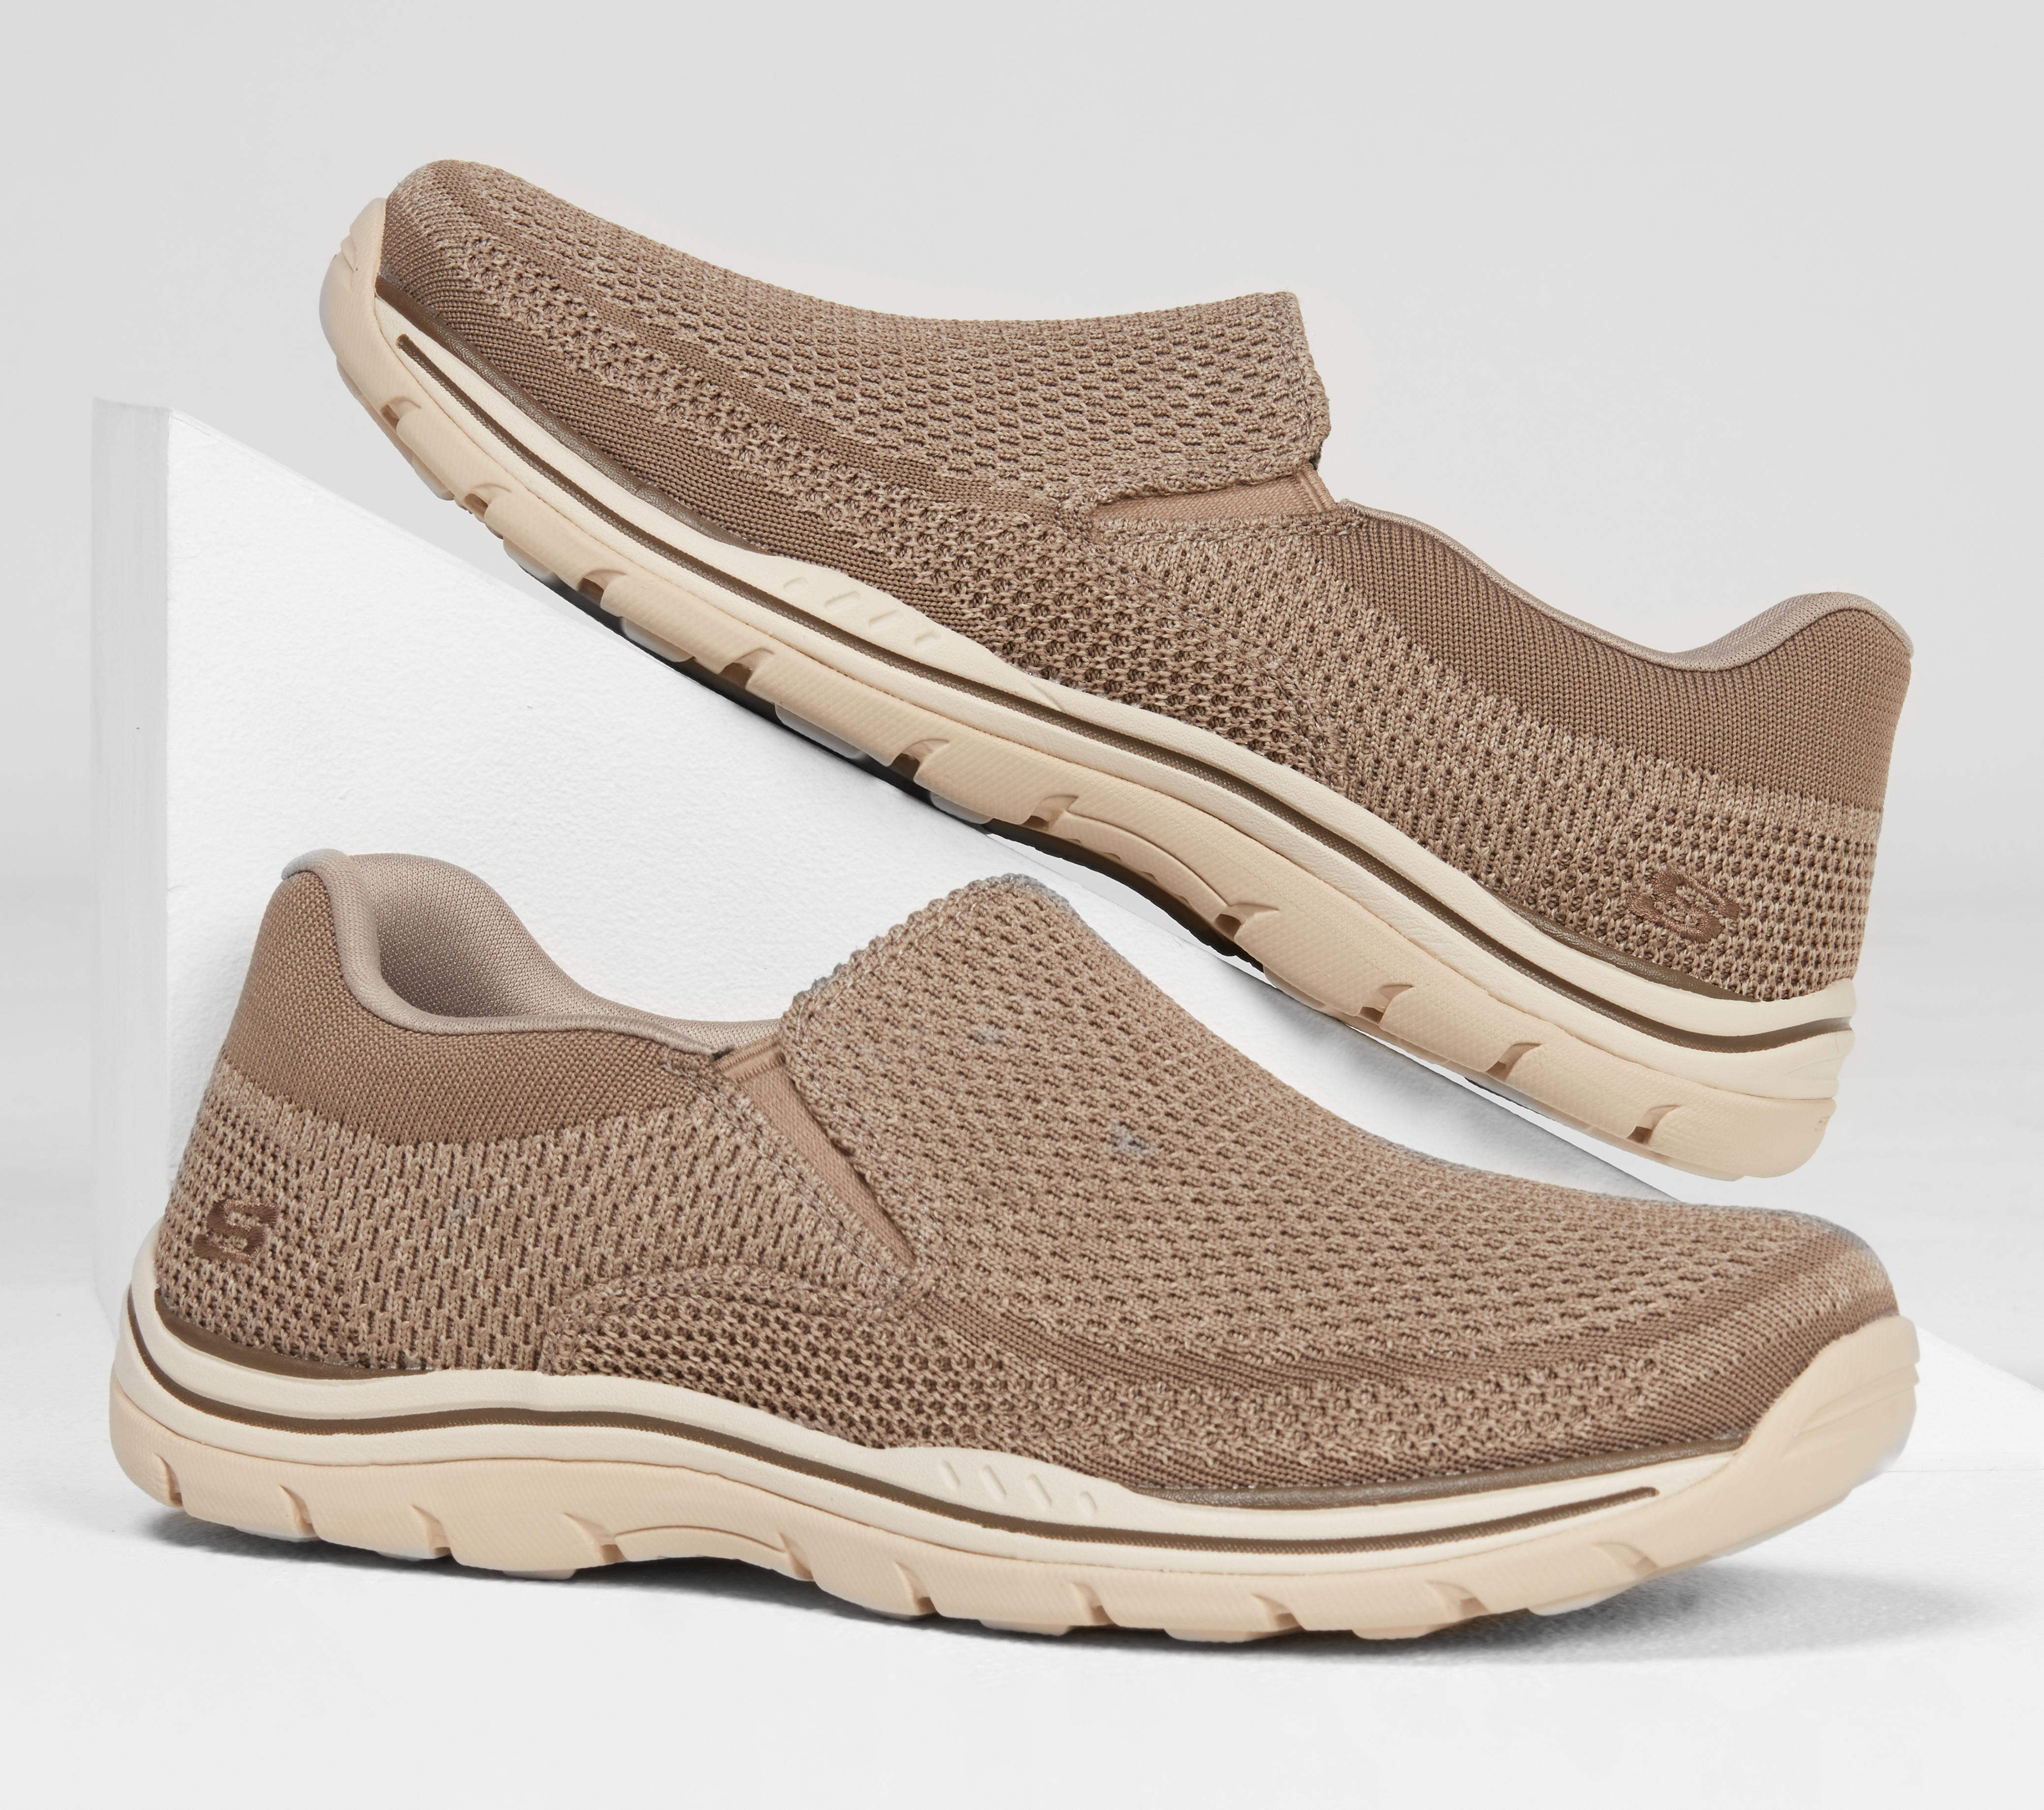 Relaxed Fit: Expected - Gomel | SKECHERS